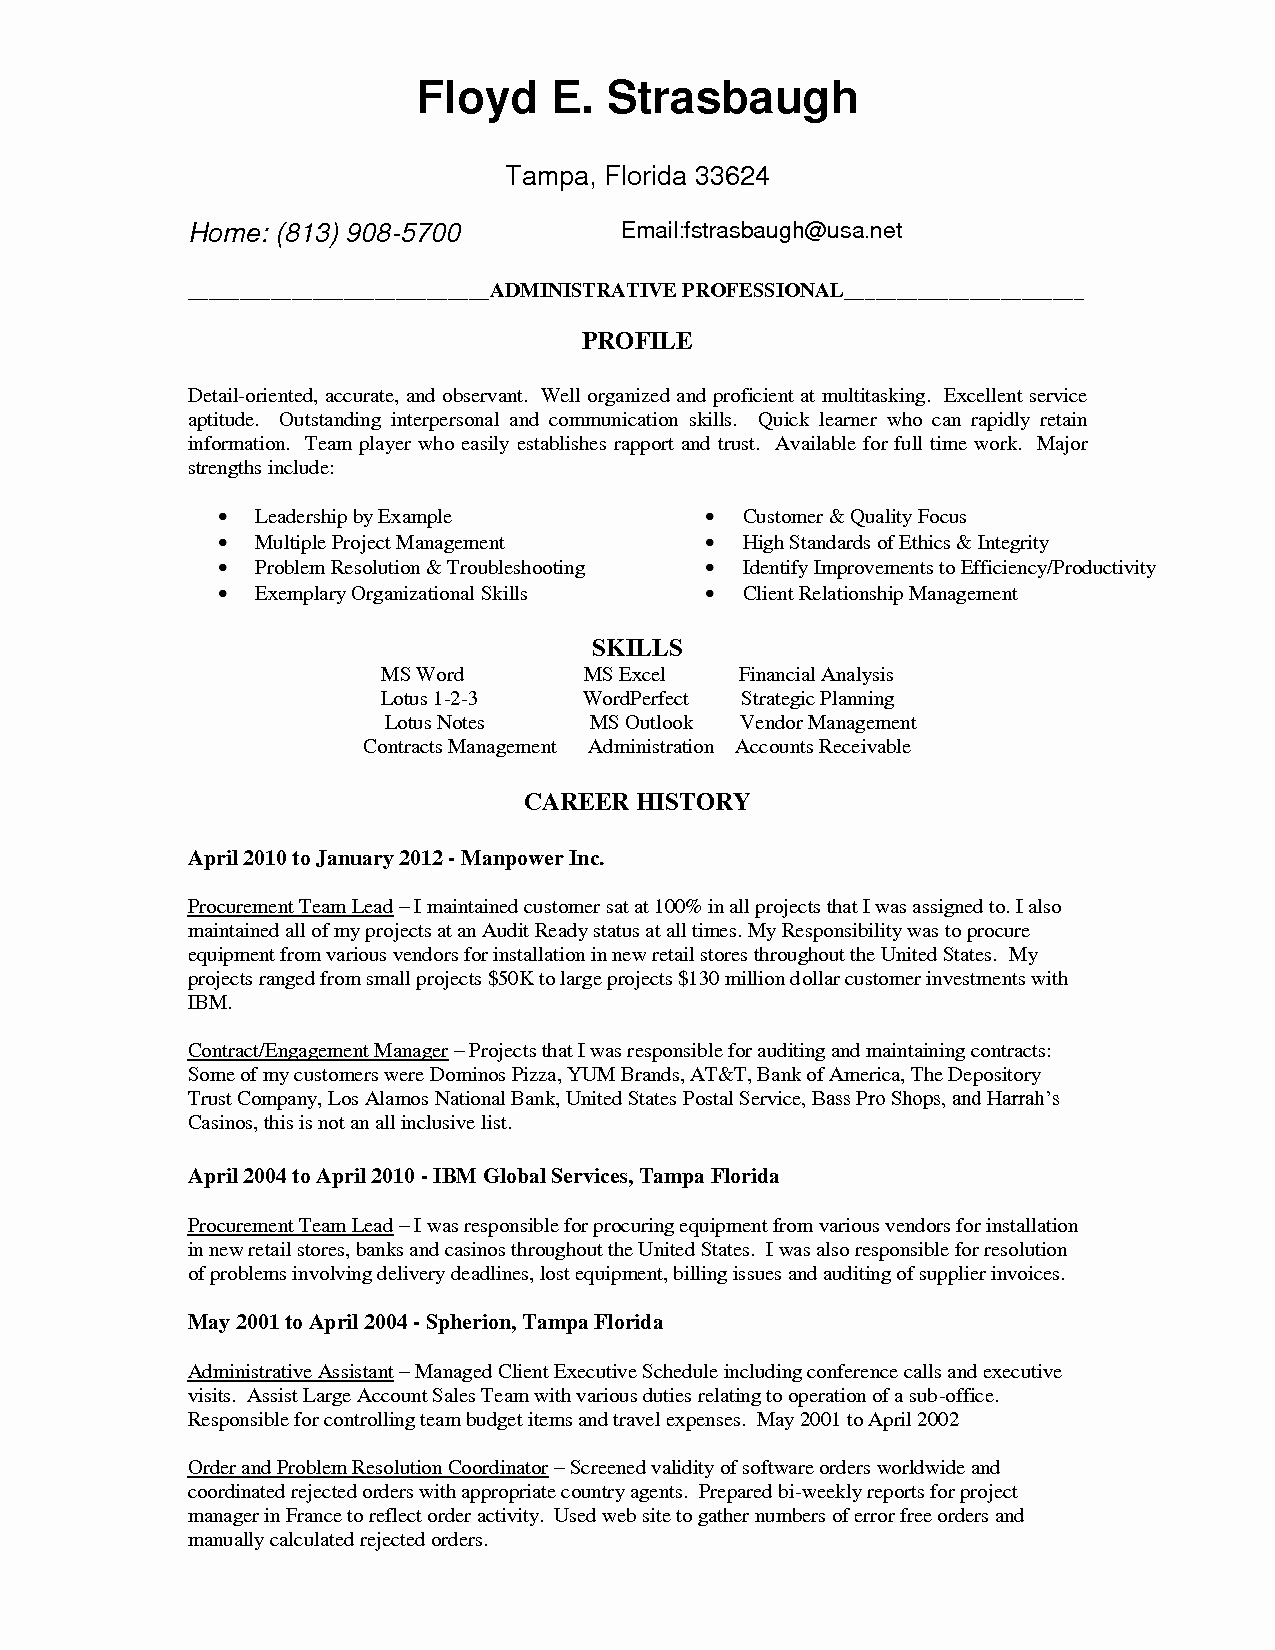 Letter Of Counseling Template - Difference Between Cover Letter and Resume Fresh Professional Resume